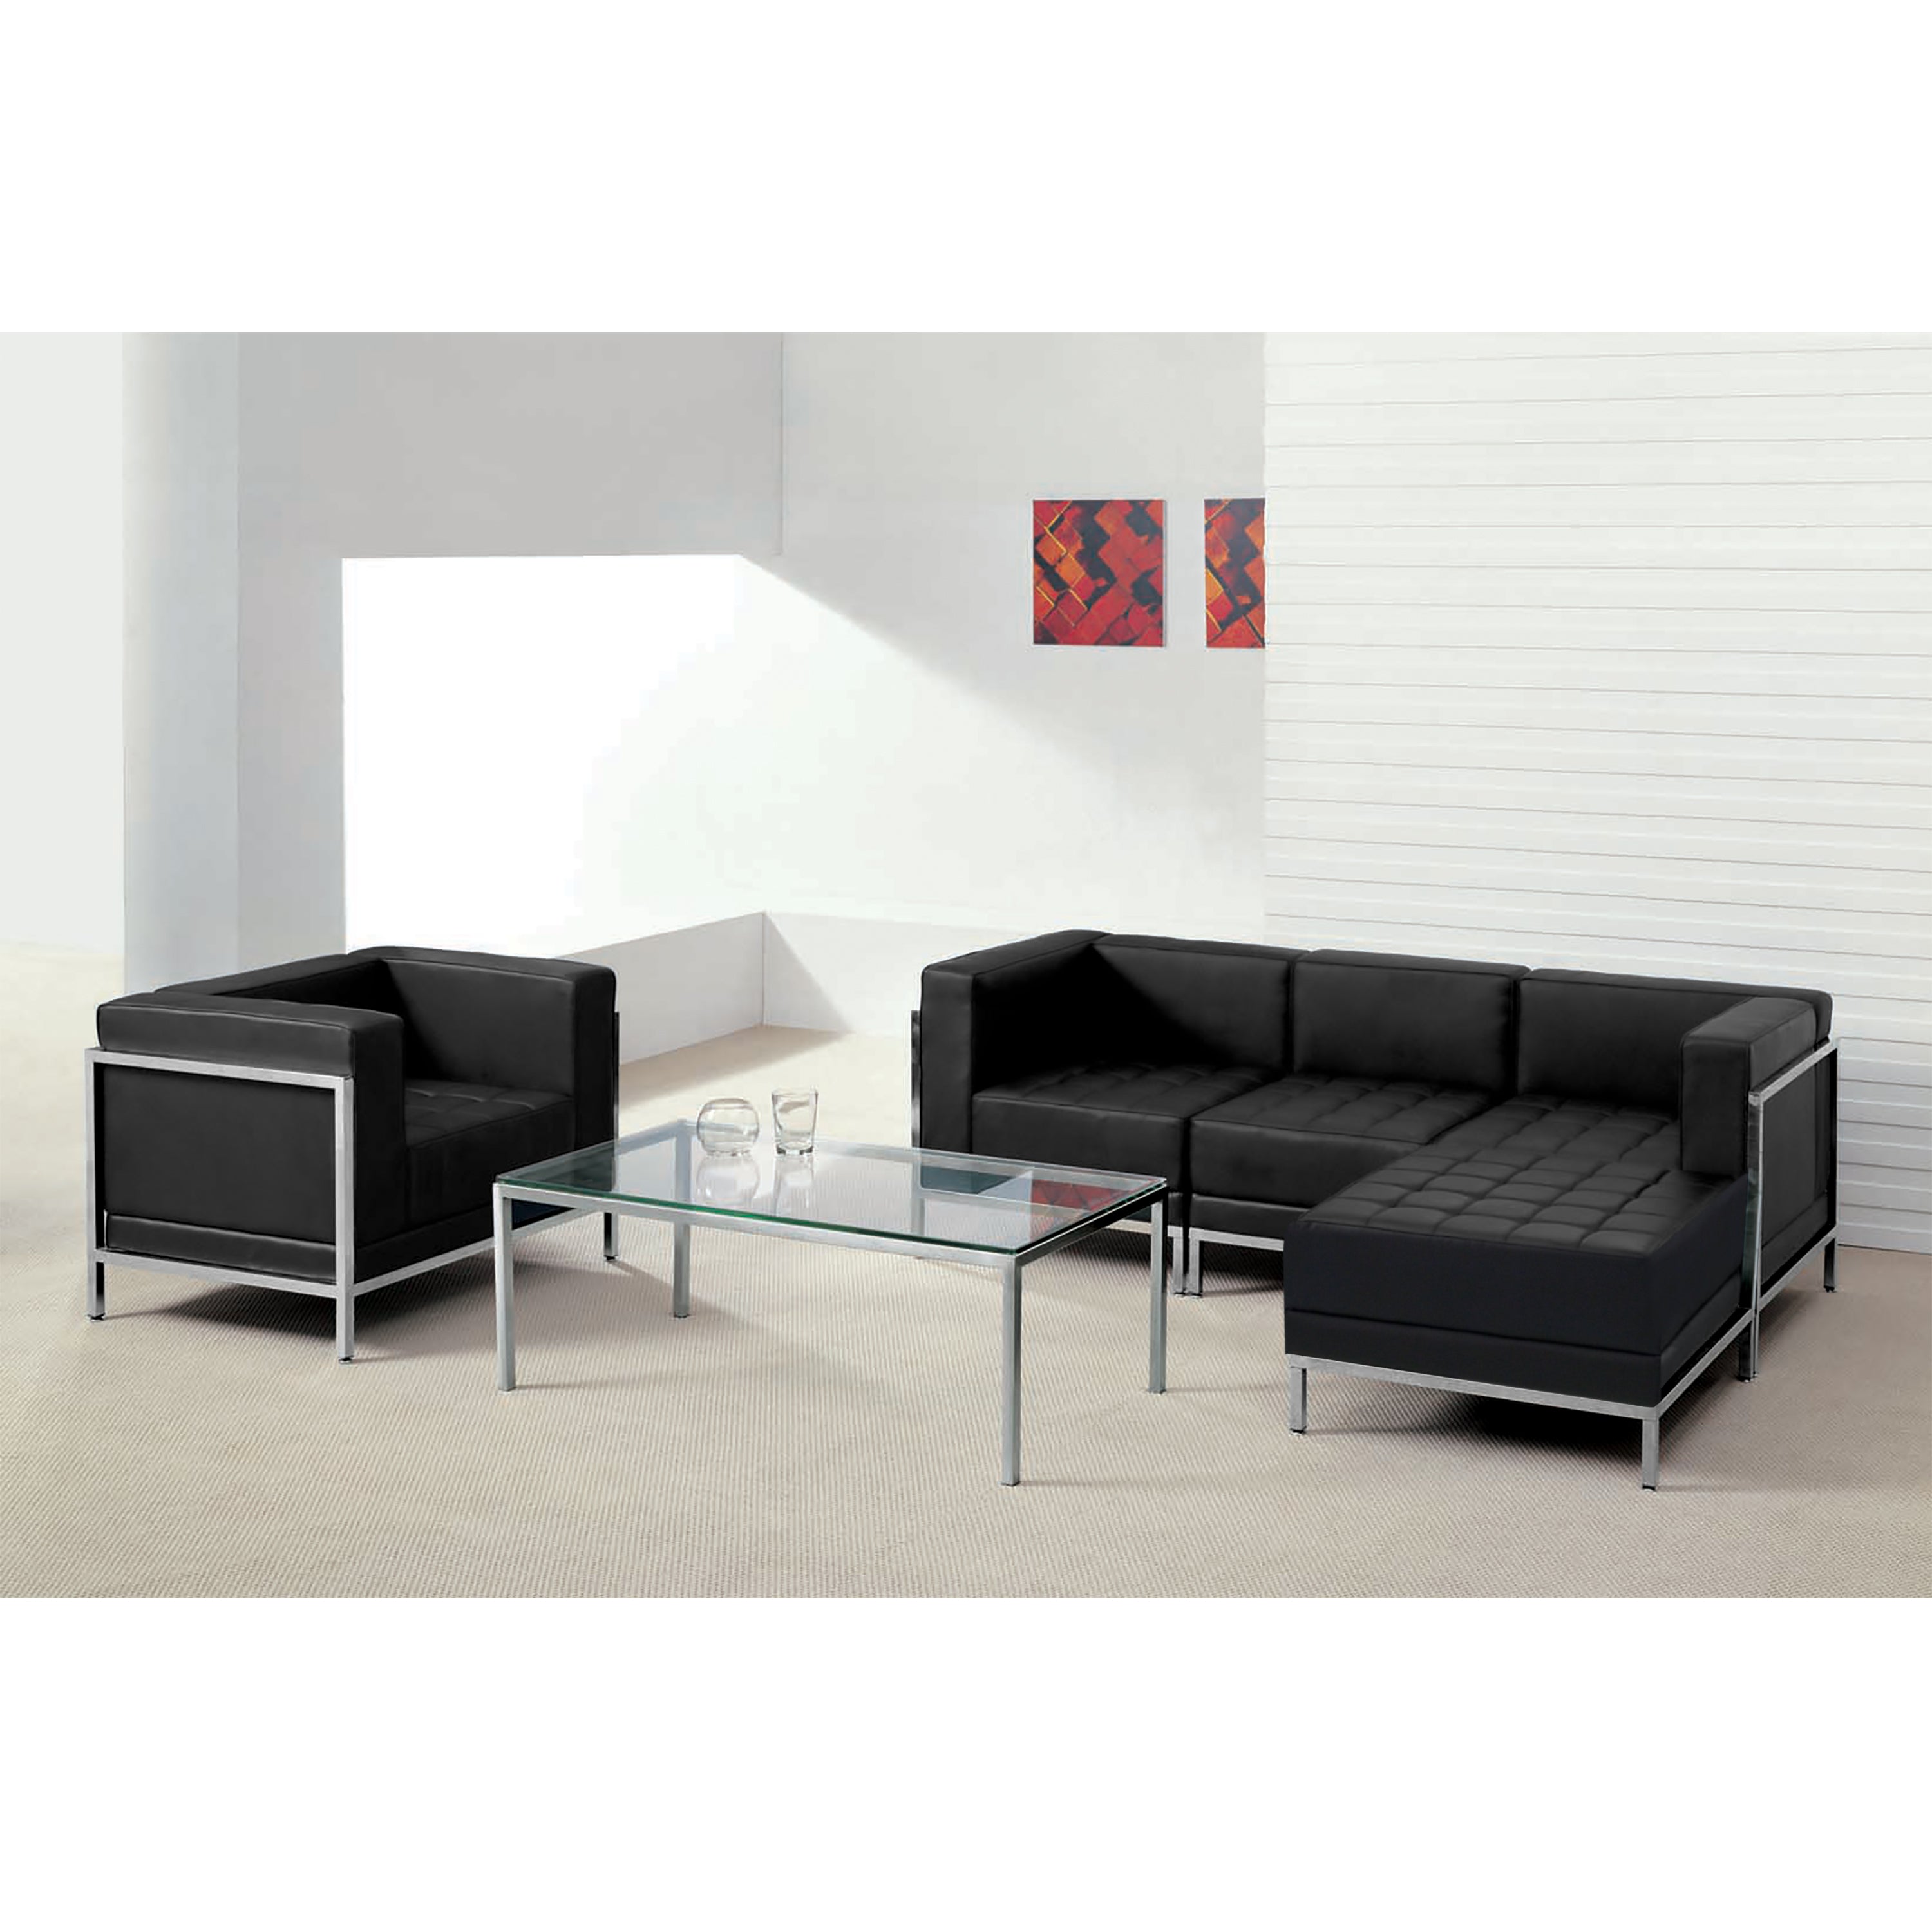 HERCULES Imagination Series LeatherSoft Sectional & Chair, 5 Pieces-Modular Reception Set-Flash Furniture-Wall2Wall Furnishings